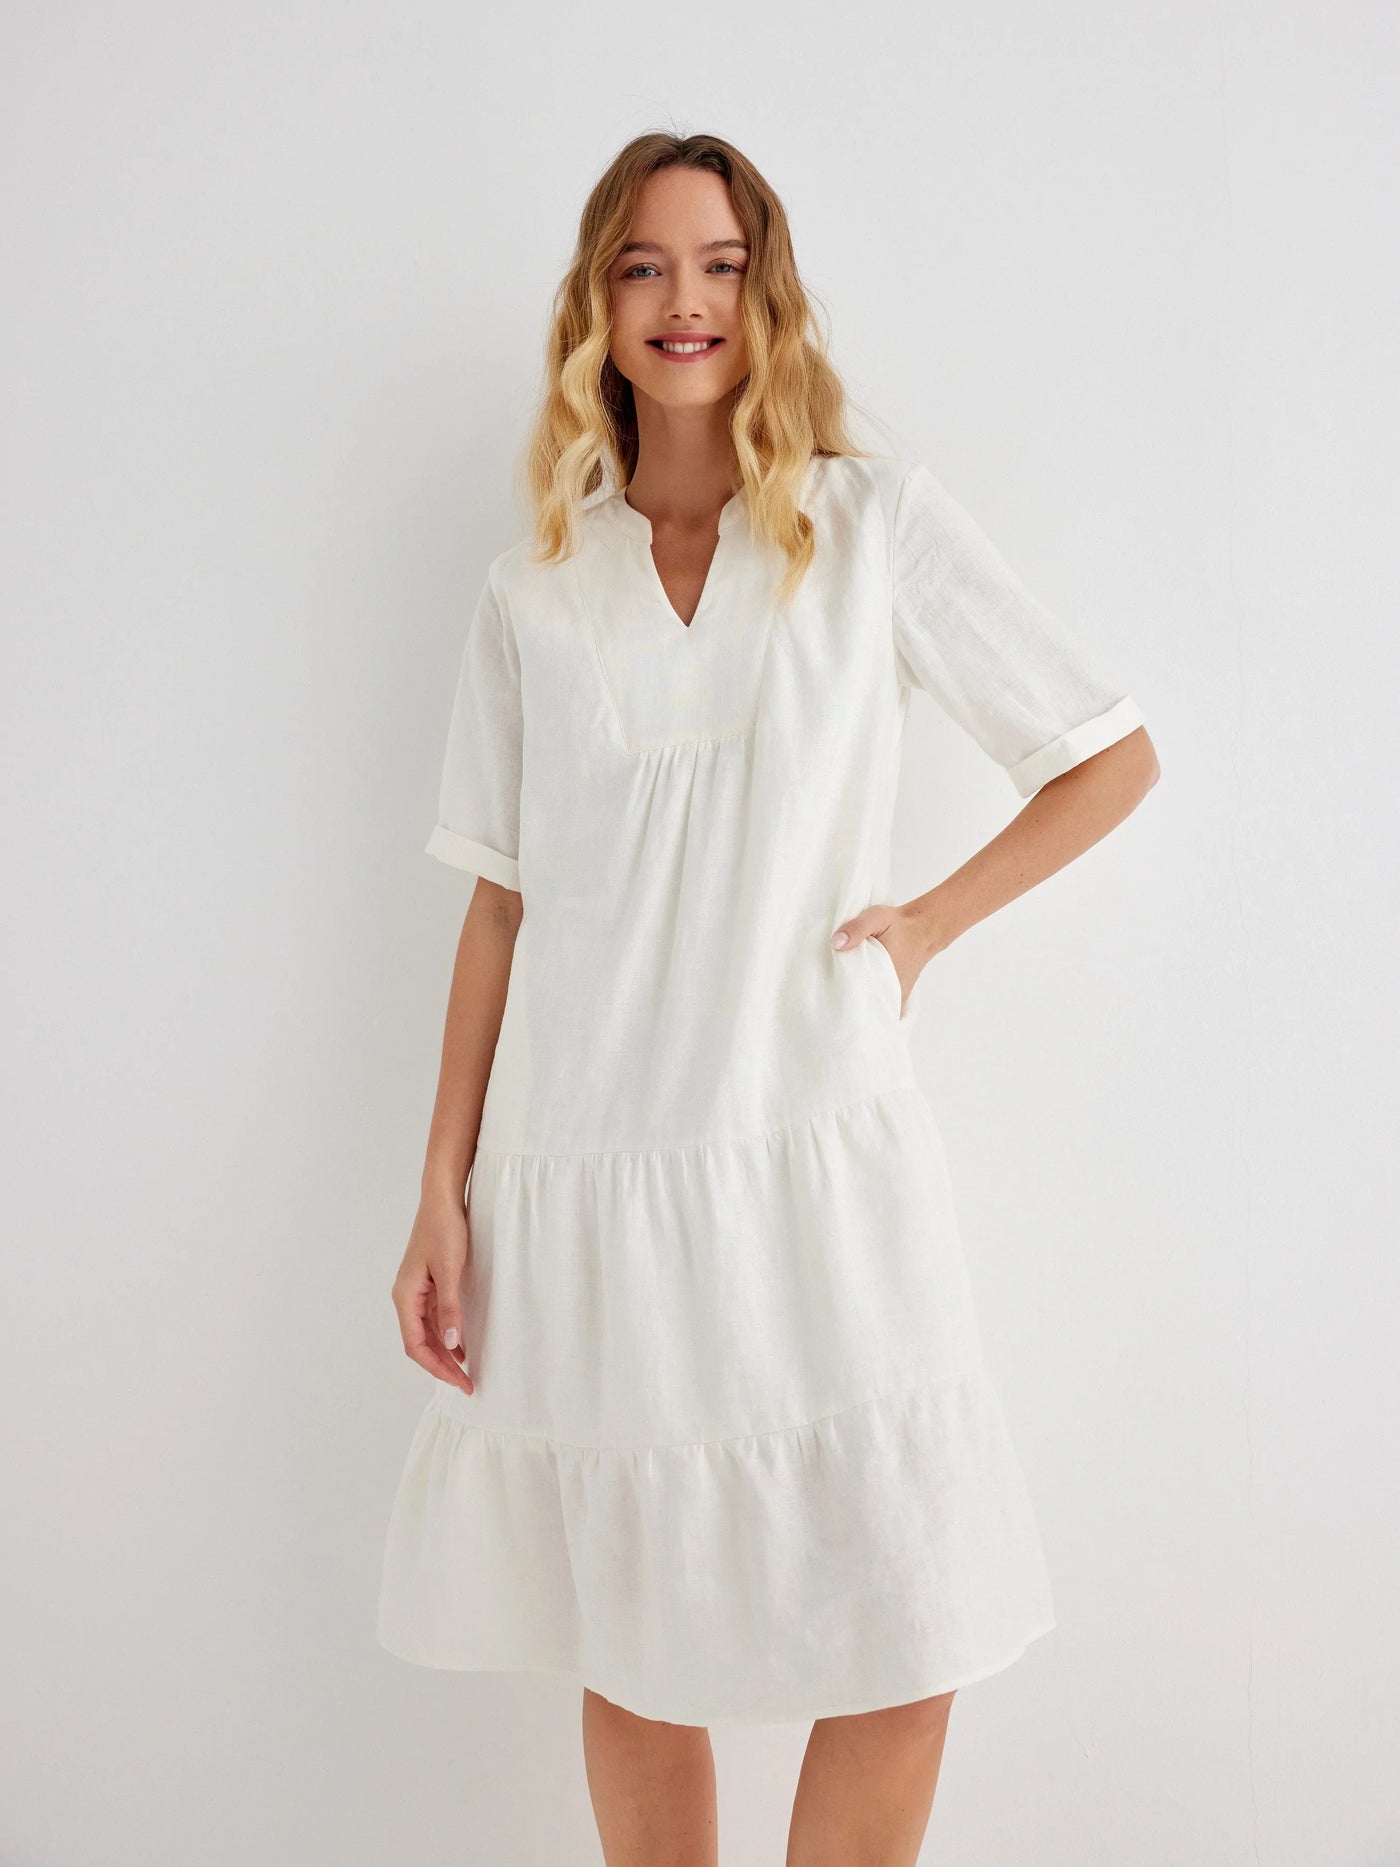 Fallon 100% Linen Relaxed FIt V-neck Tiered Dress